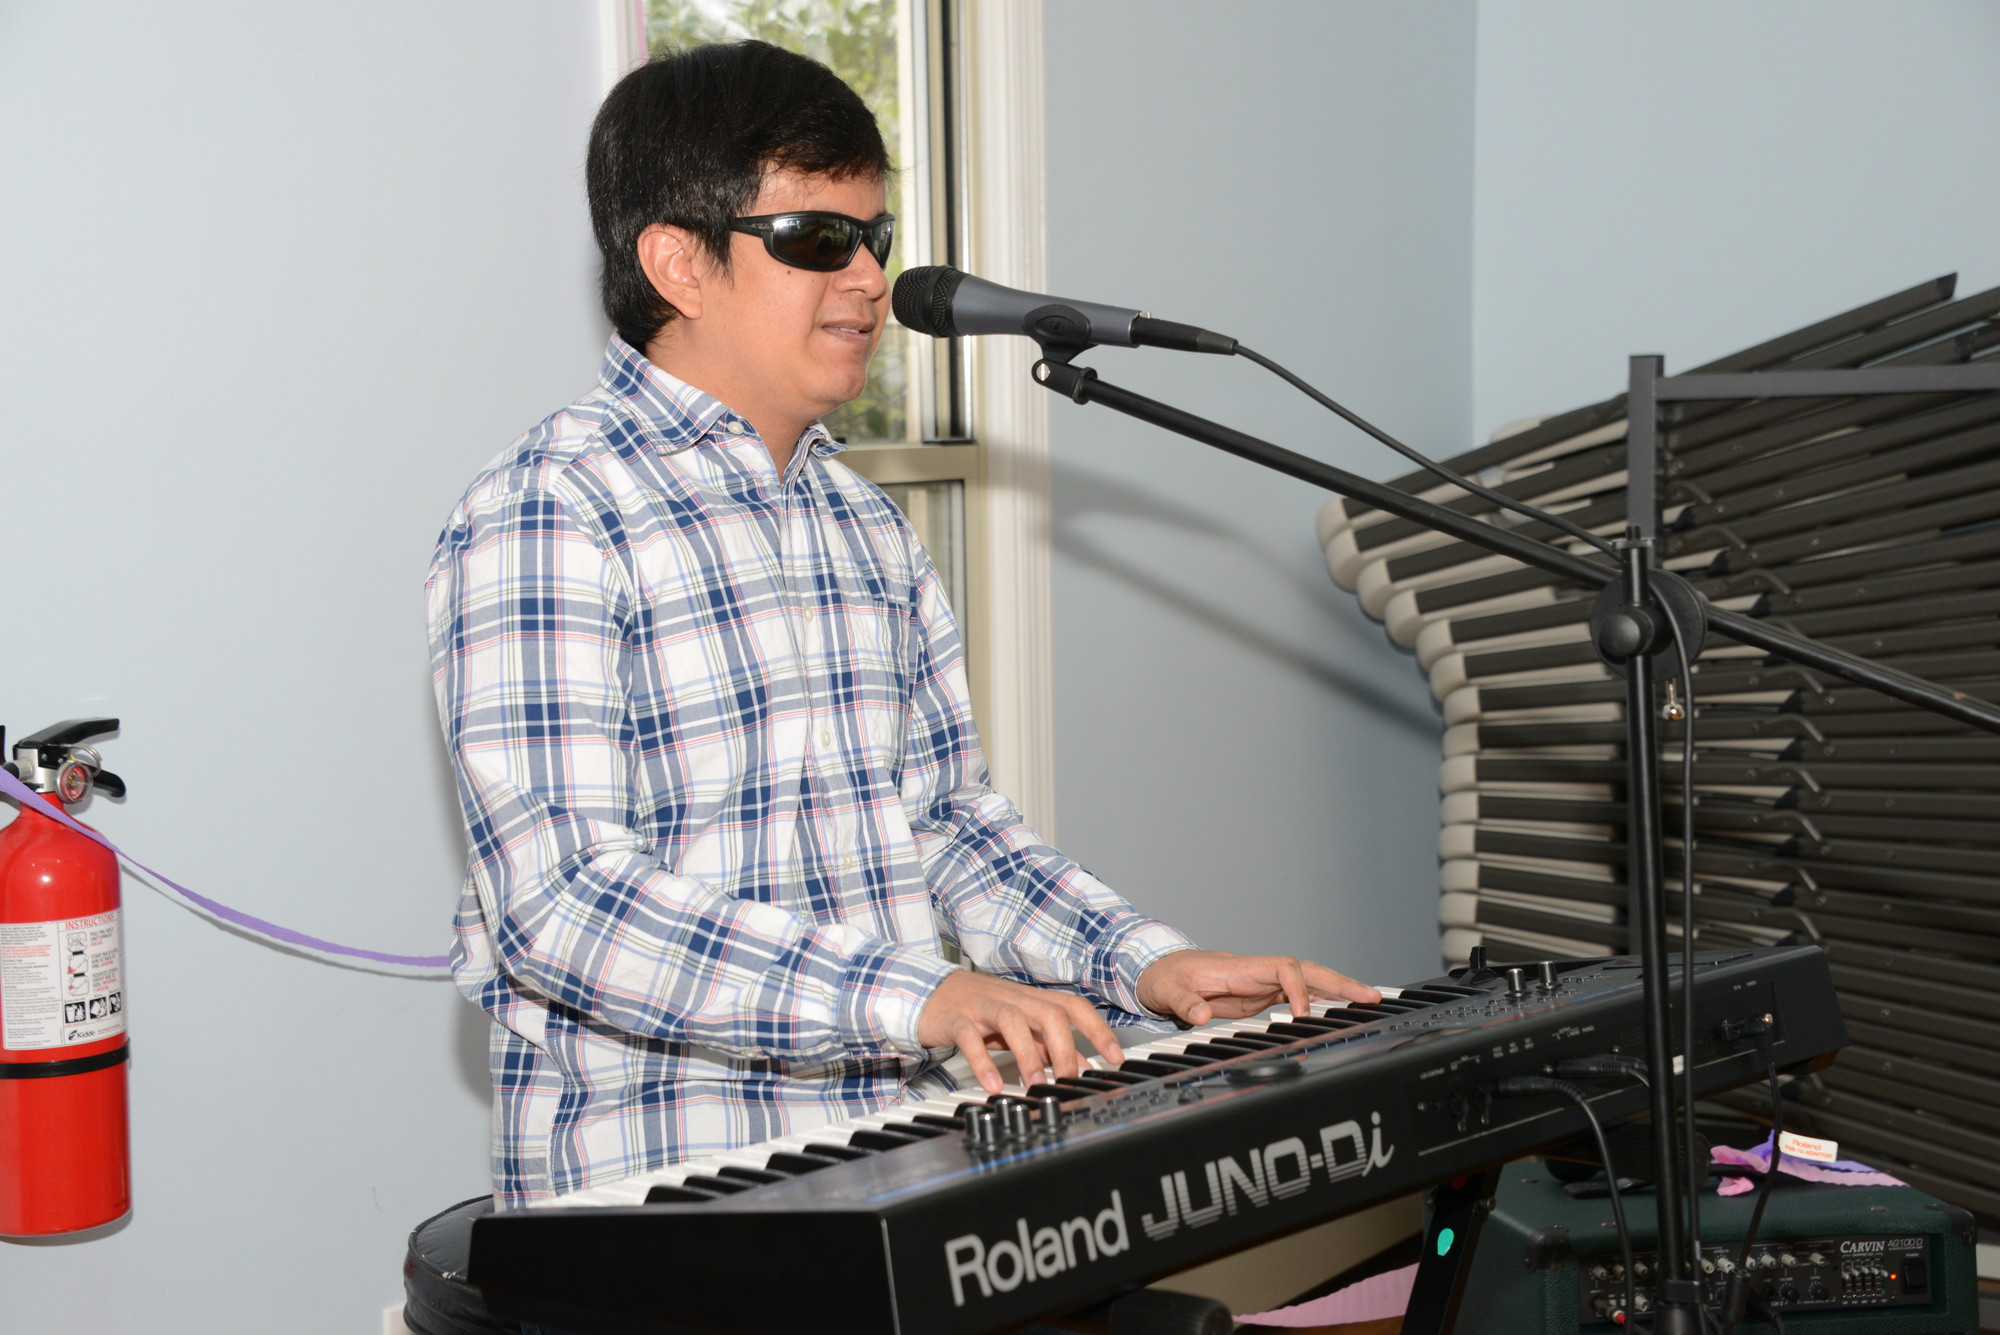 Allan Gonzalez entertained the crowd on the keyboards.